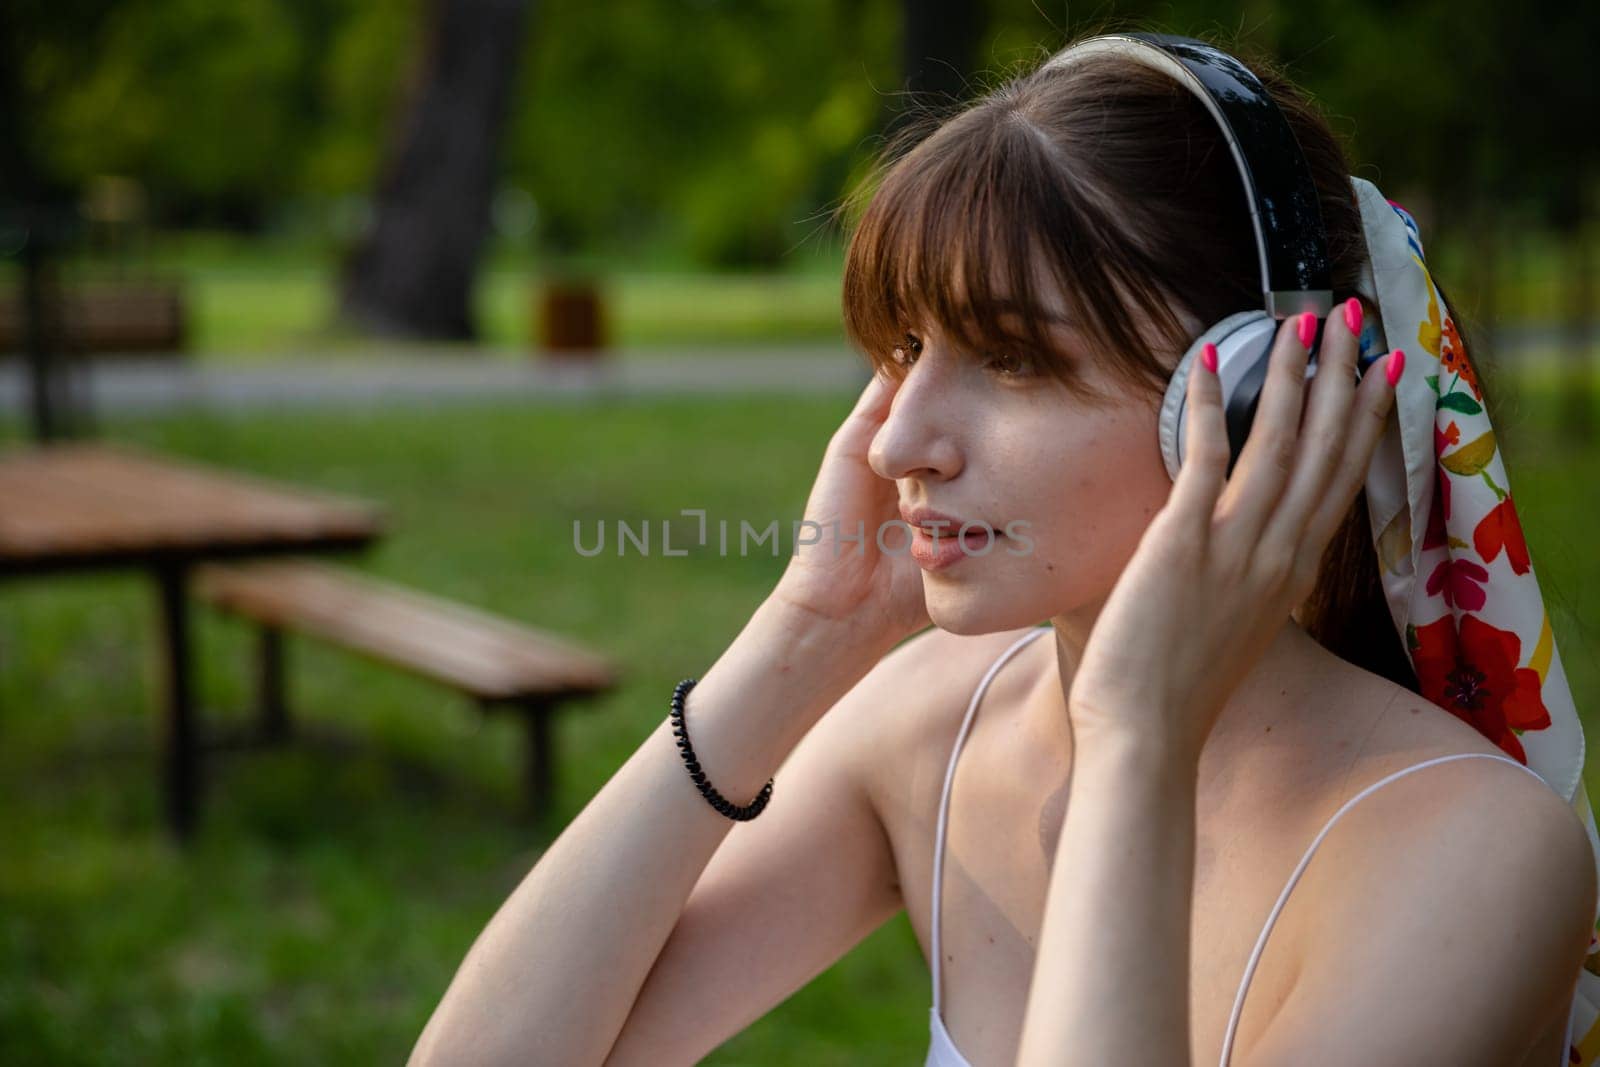 A close-up of a young girl's face. She wears wireless headphones on her head. The woman looks ahead and listens to music. She has a ponytail hairstyle with a long fringe. In the background are fuzzy lawns and brown wooden benches.